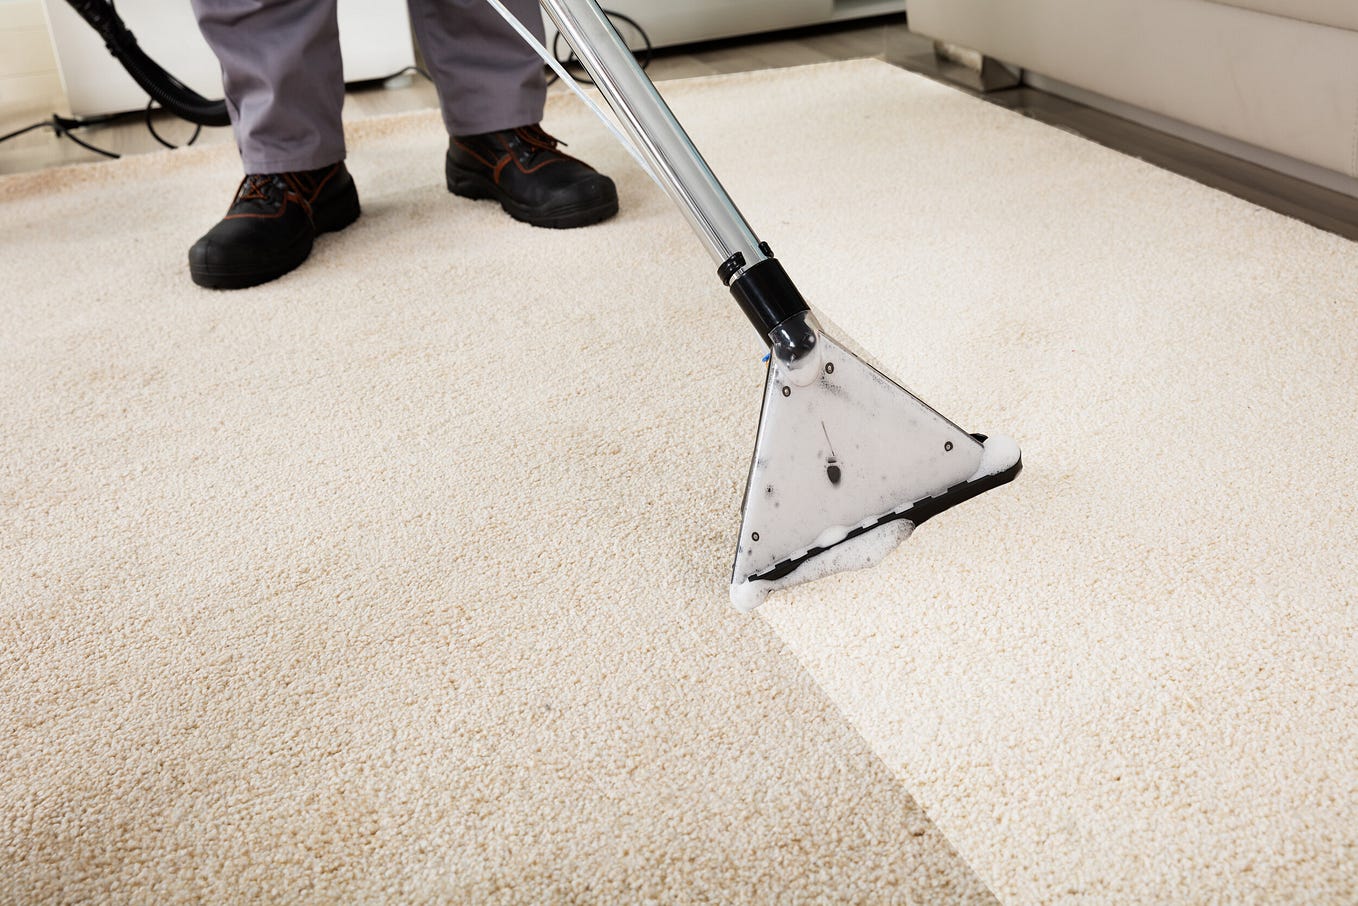 Does carpet dry faster in warm weather? — Sno-King Carpet